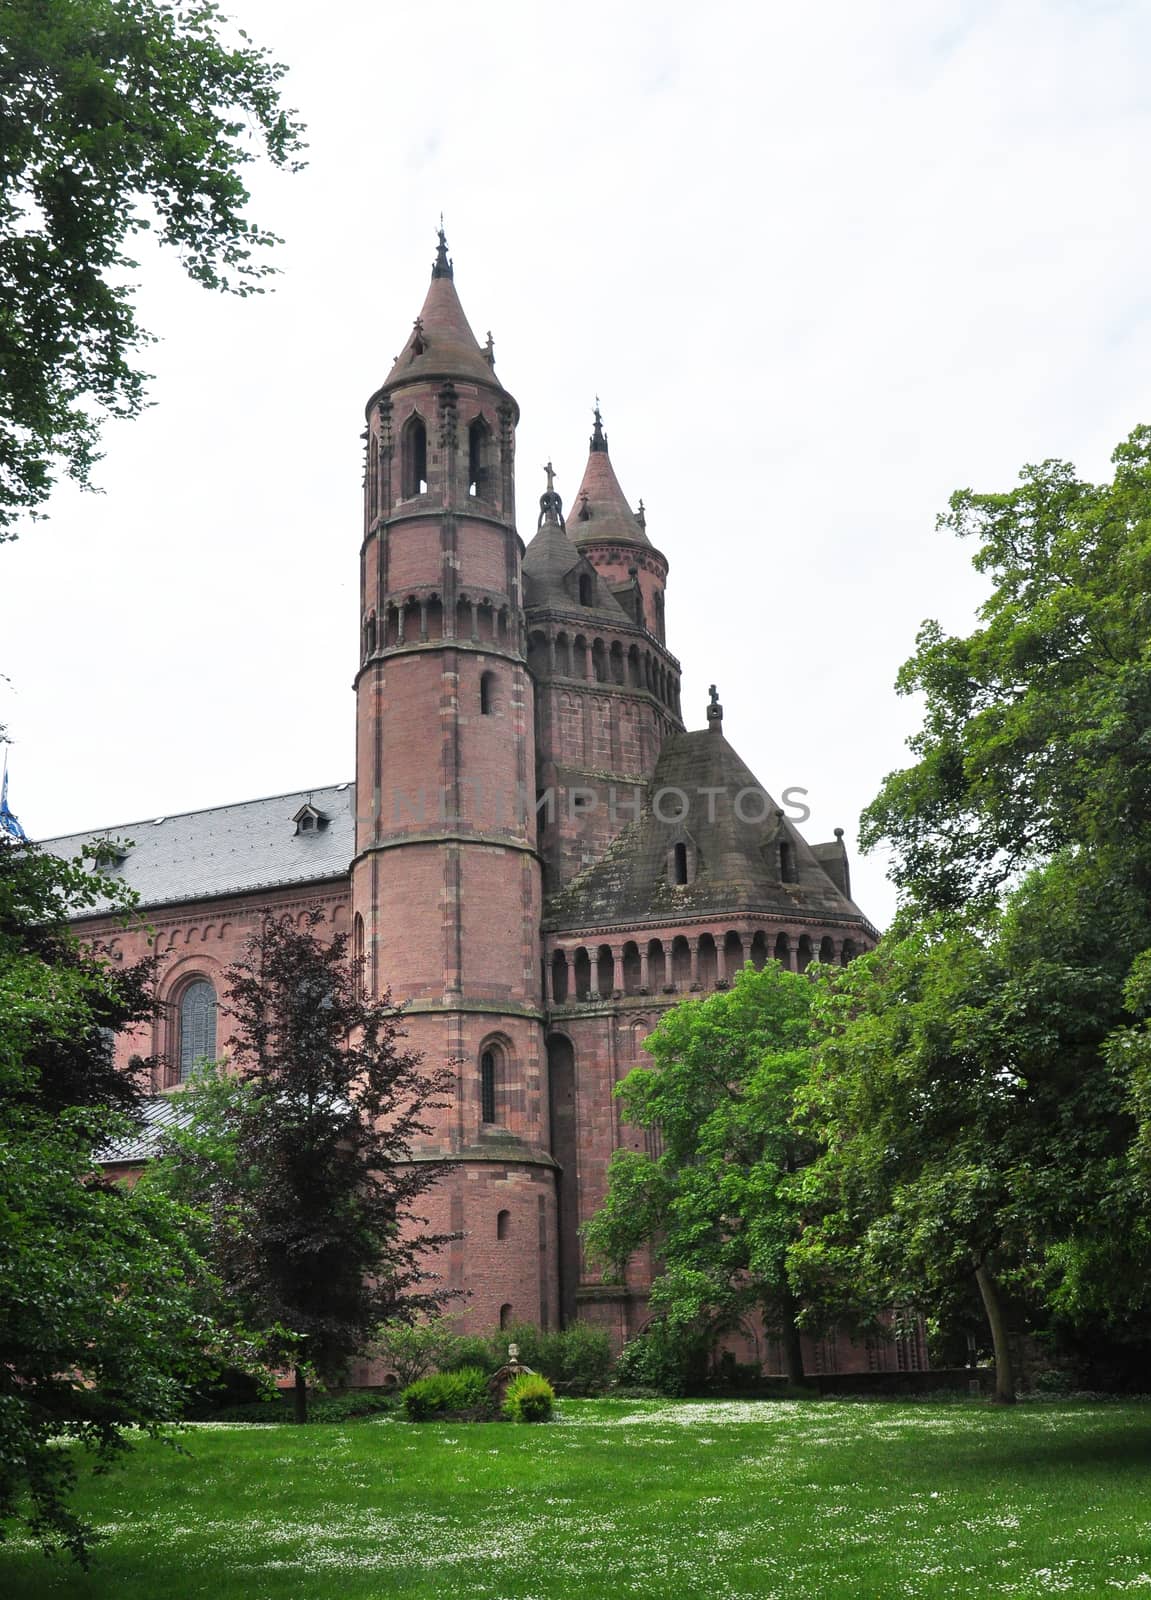 Cathedral Saint Peter in Worms, Germany